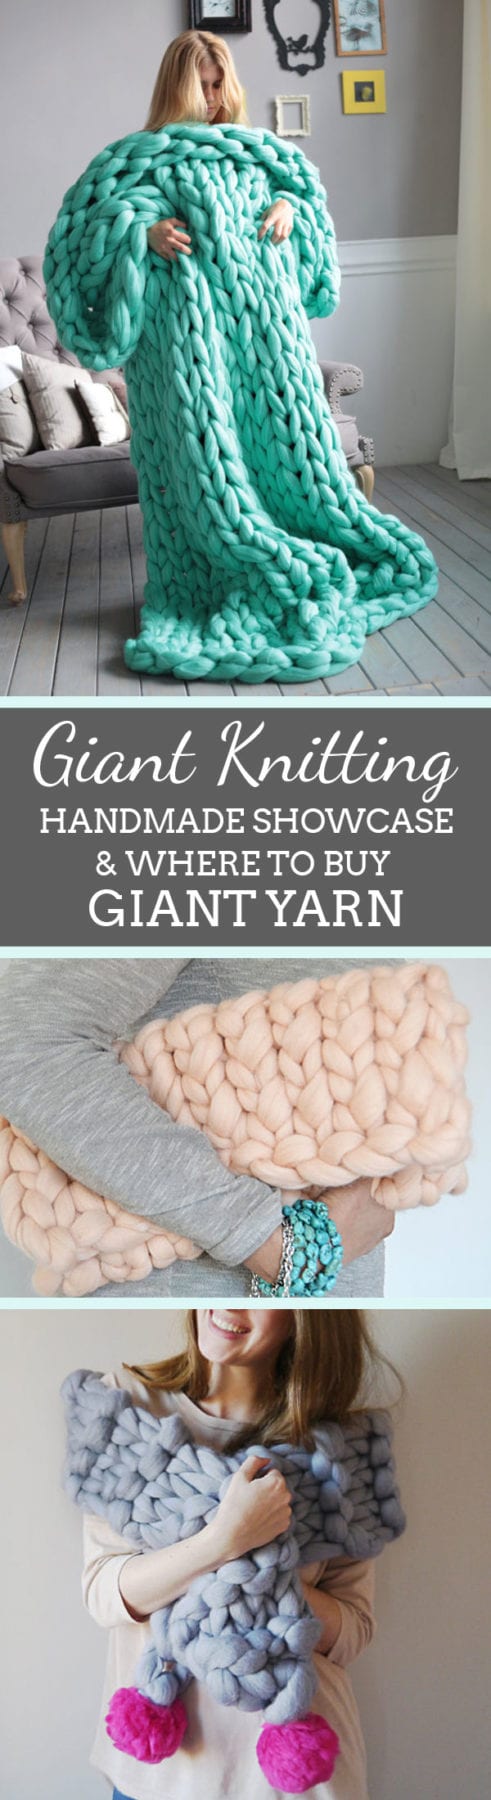 Giant Knitting - Amazing Knitted Creations & Where to Buy Giant Yarn